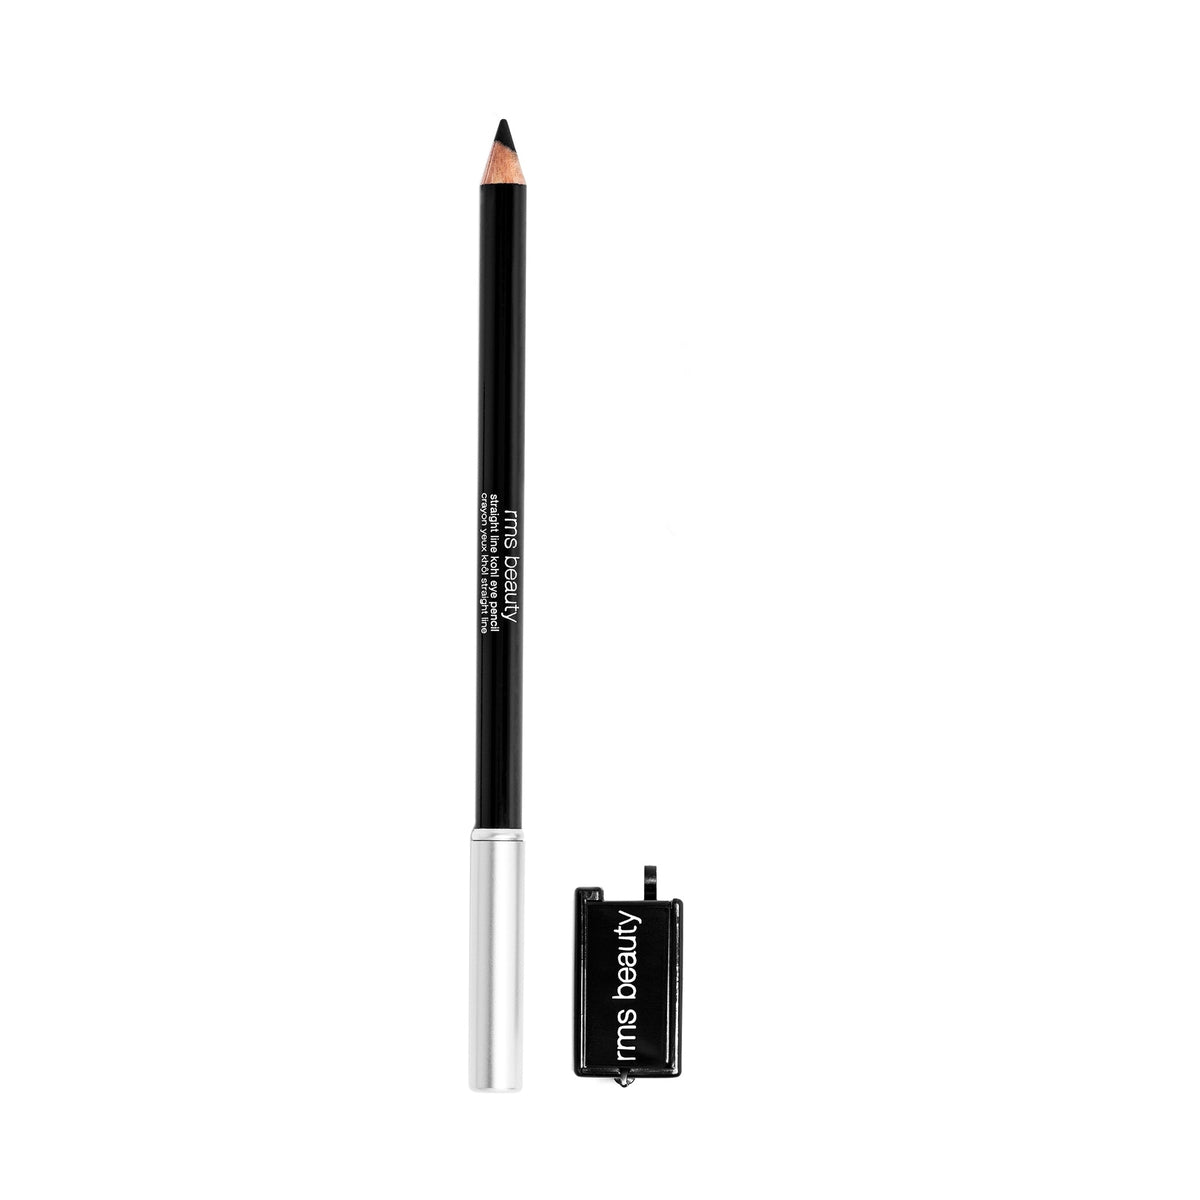 Rms Beauty Straight Line Khol Eye Pencil In The Ultimate Black